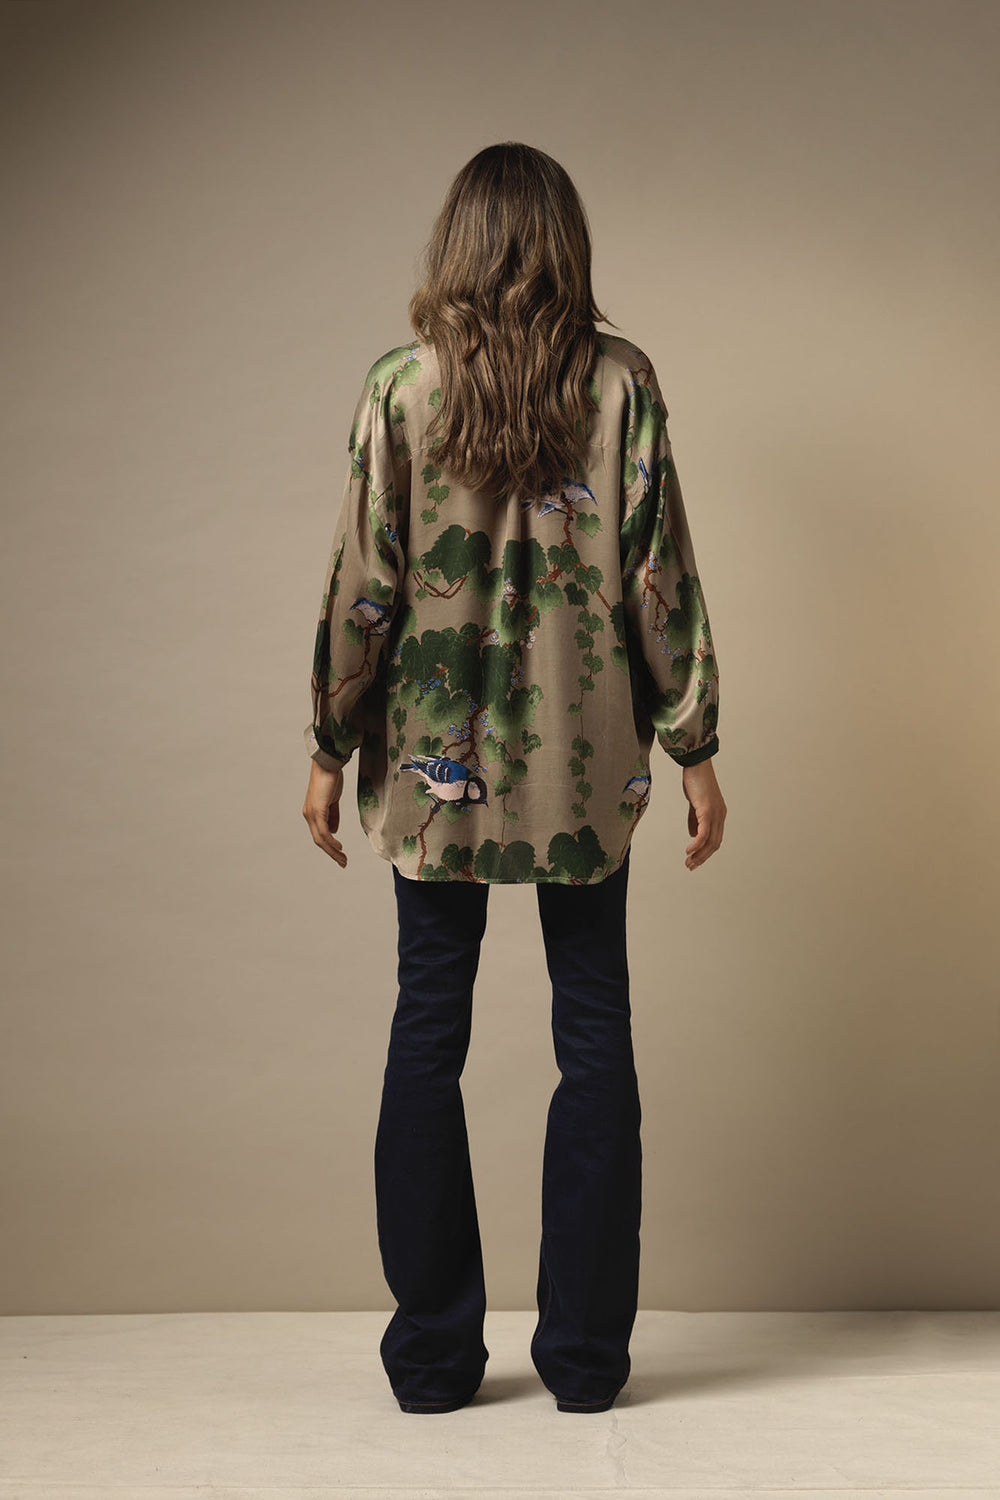 Satin long sleeve autumn winter ladies shirt with green maple leaf pattern on a stone background by One Hundred Stars